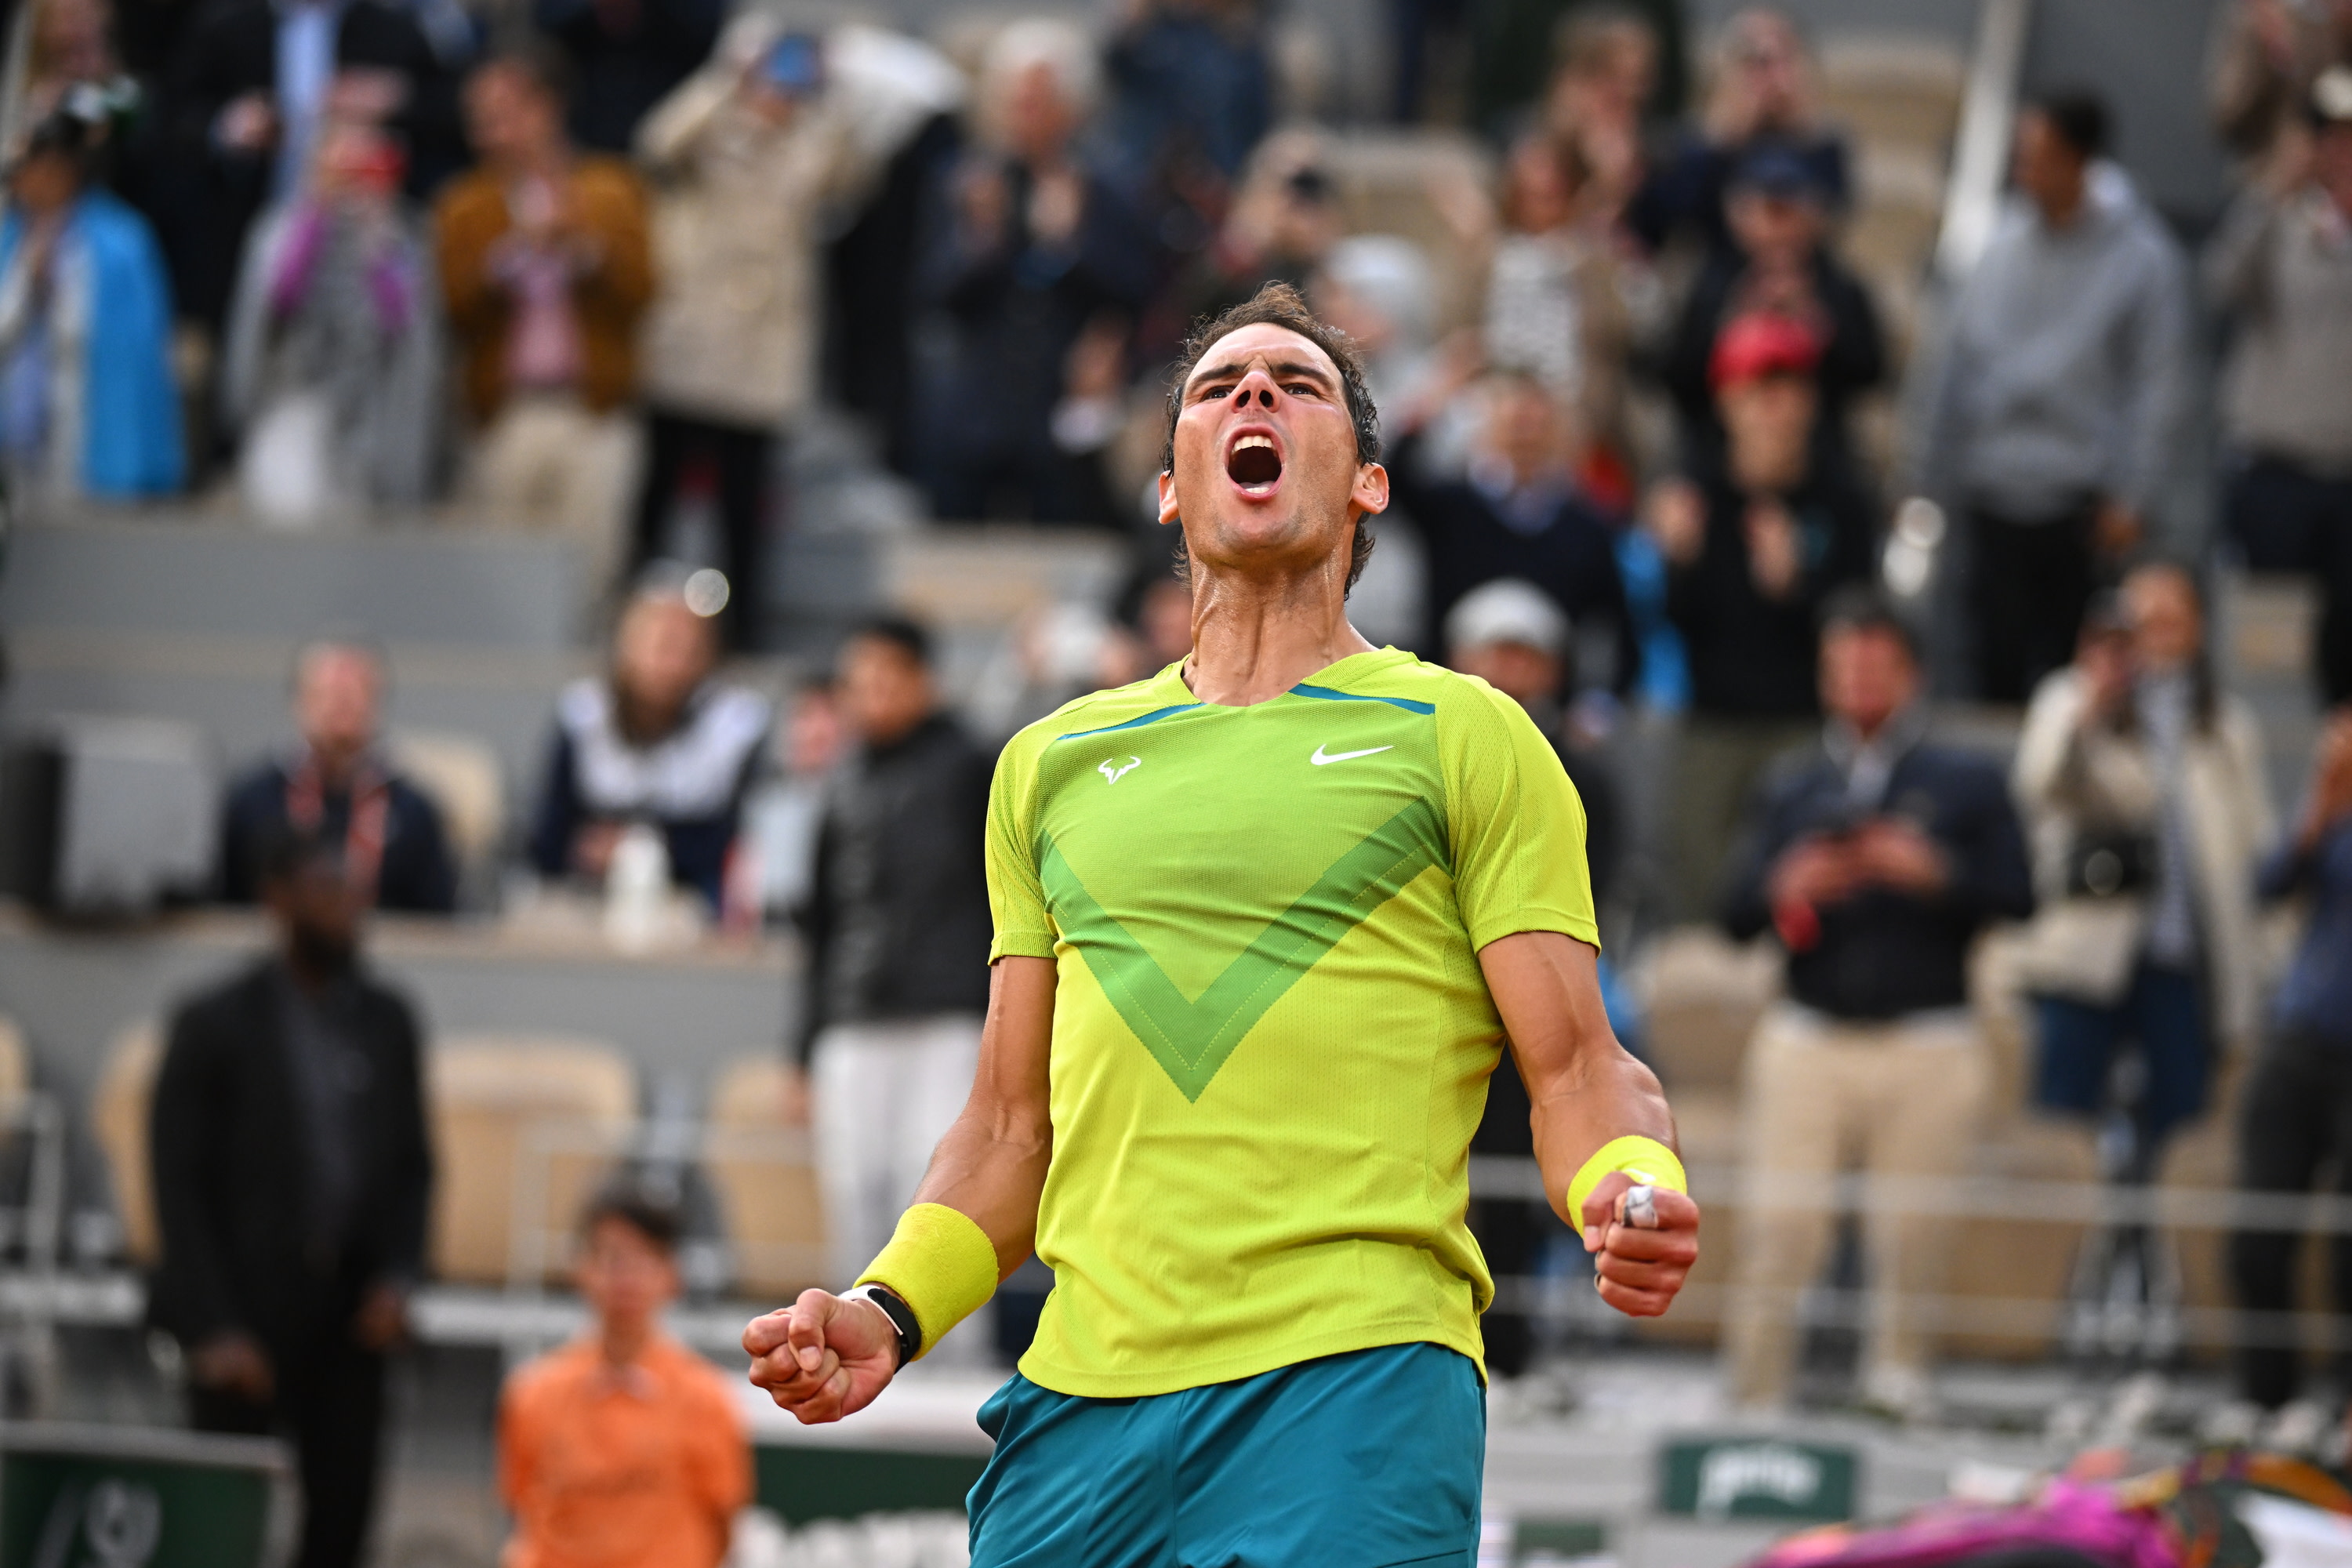 Playing “with the right dimensions”, Rafael Nadal found his best when most needed to meet Felix Auger-Aliassimes Roland Garros challenge